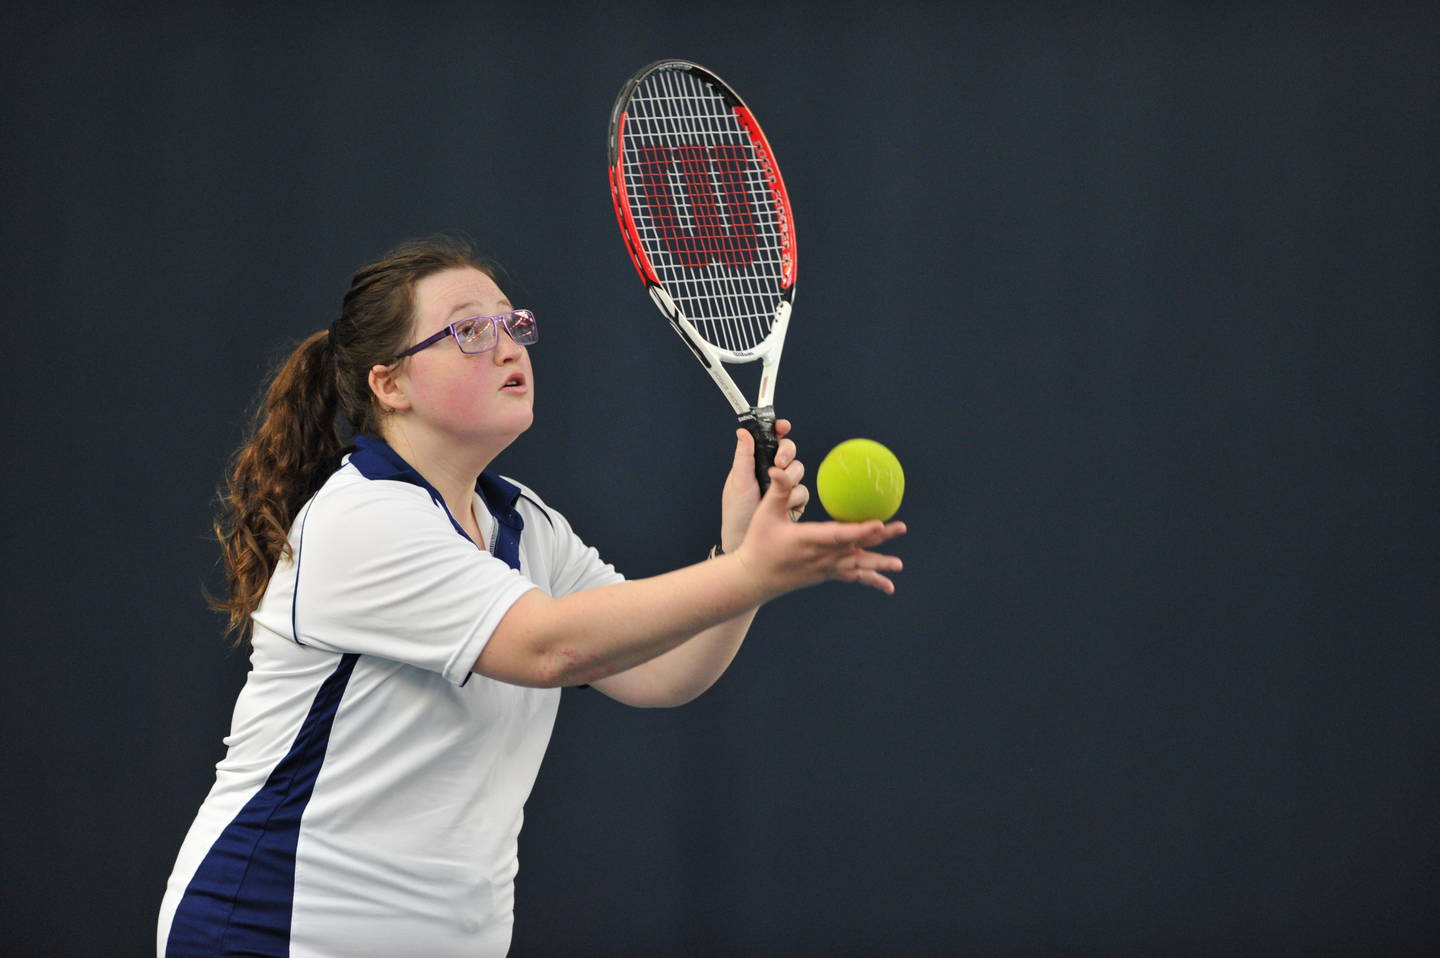 Visually impaired tennis player